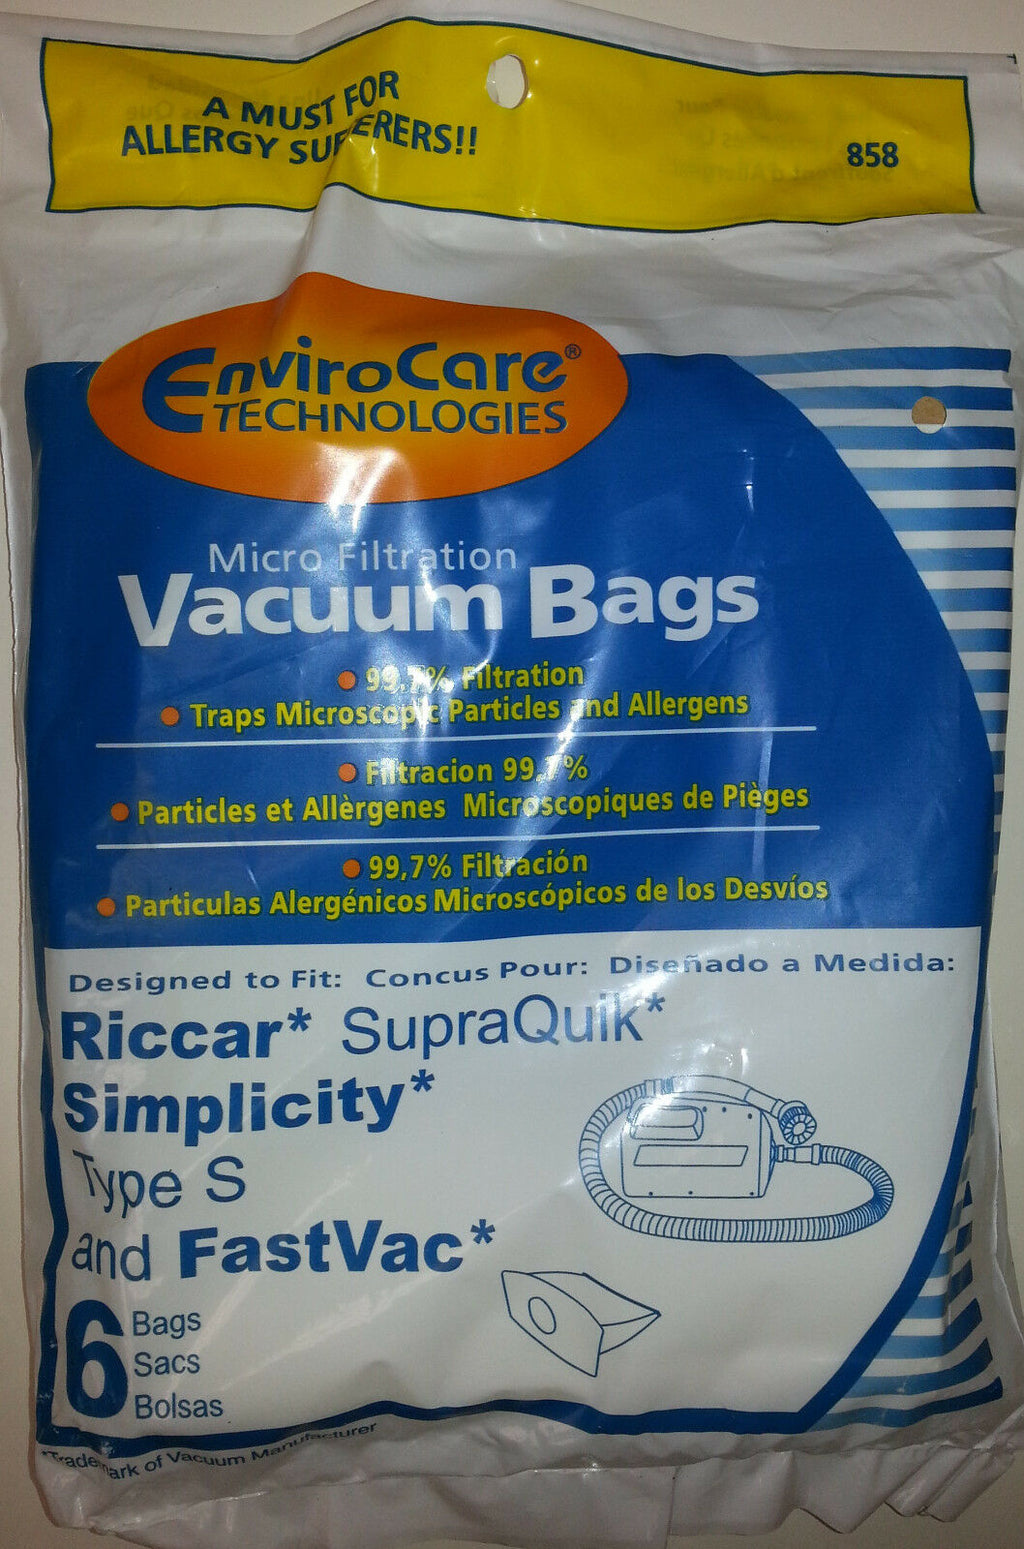 6 Vacuum Bags for Riccar, Simplicity, Fastvac Type S for Canisters. Part 858